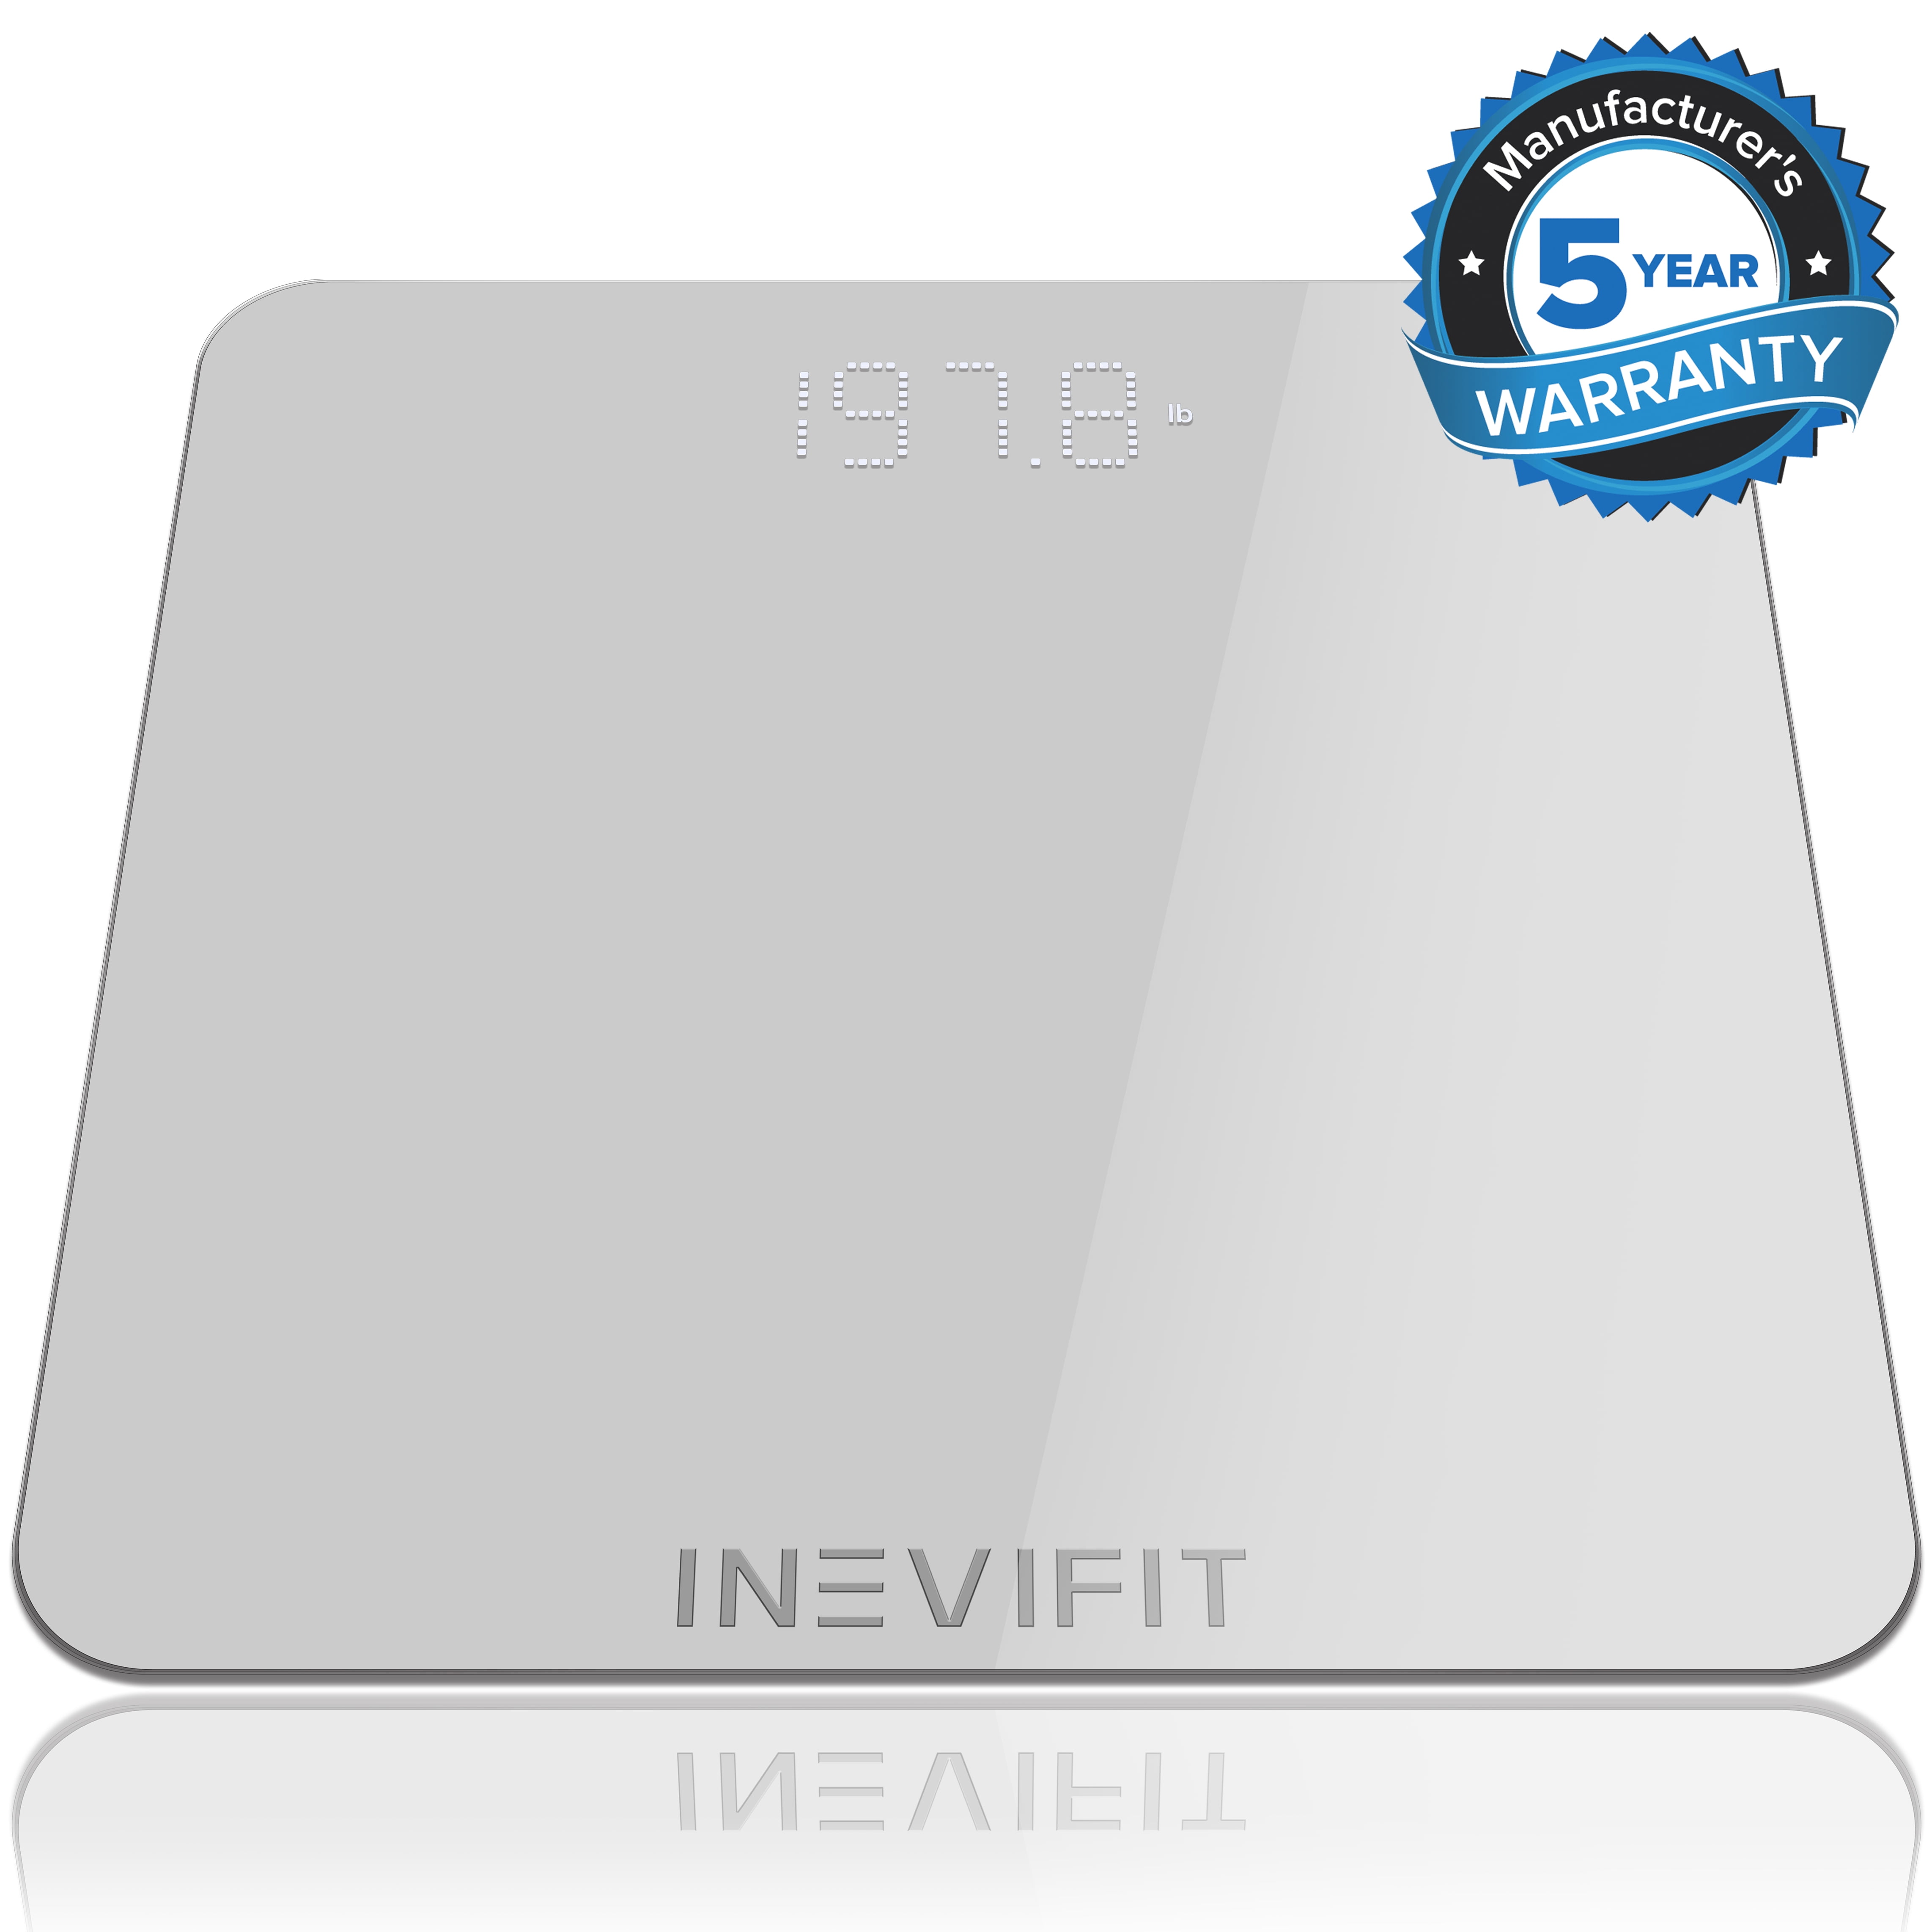 INEVIFIT Bathroom Scale, Highly Accurate Digital Bathroom Body Scale,  Measures Weight up to 400 lbs. Includes a 5-Year Warranty - Silver 